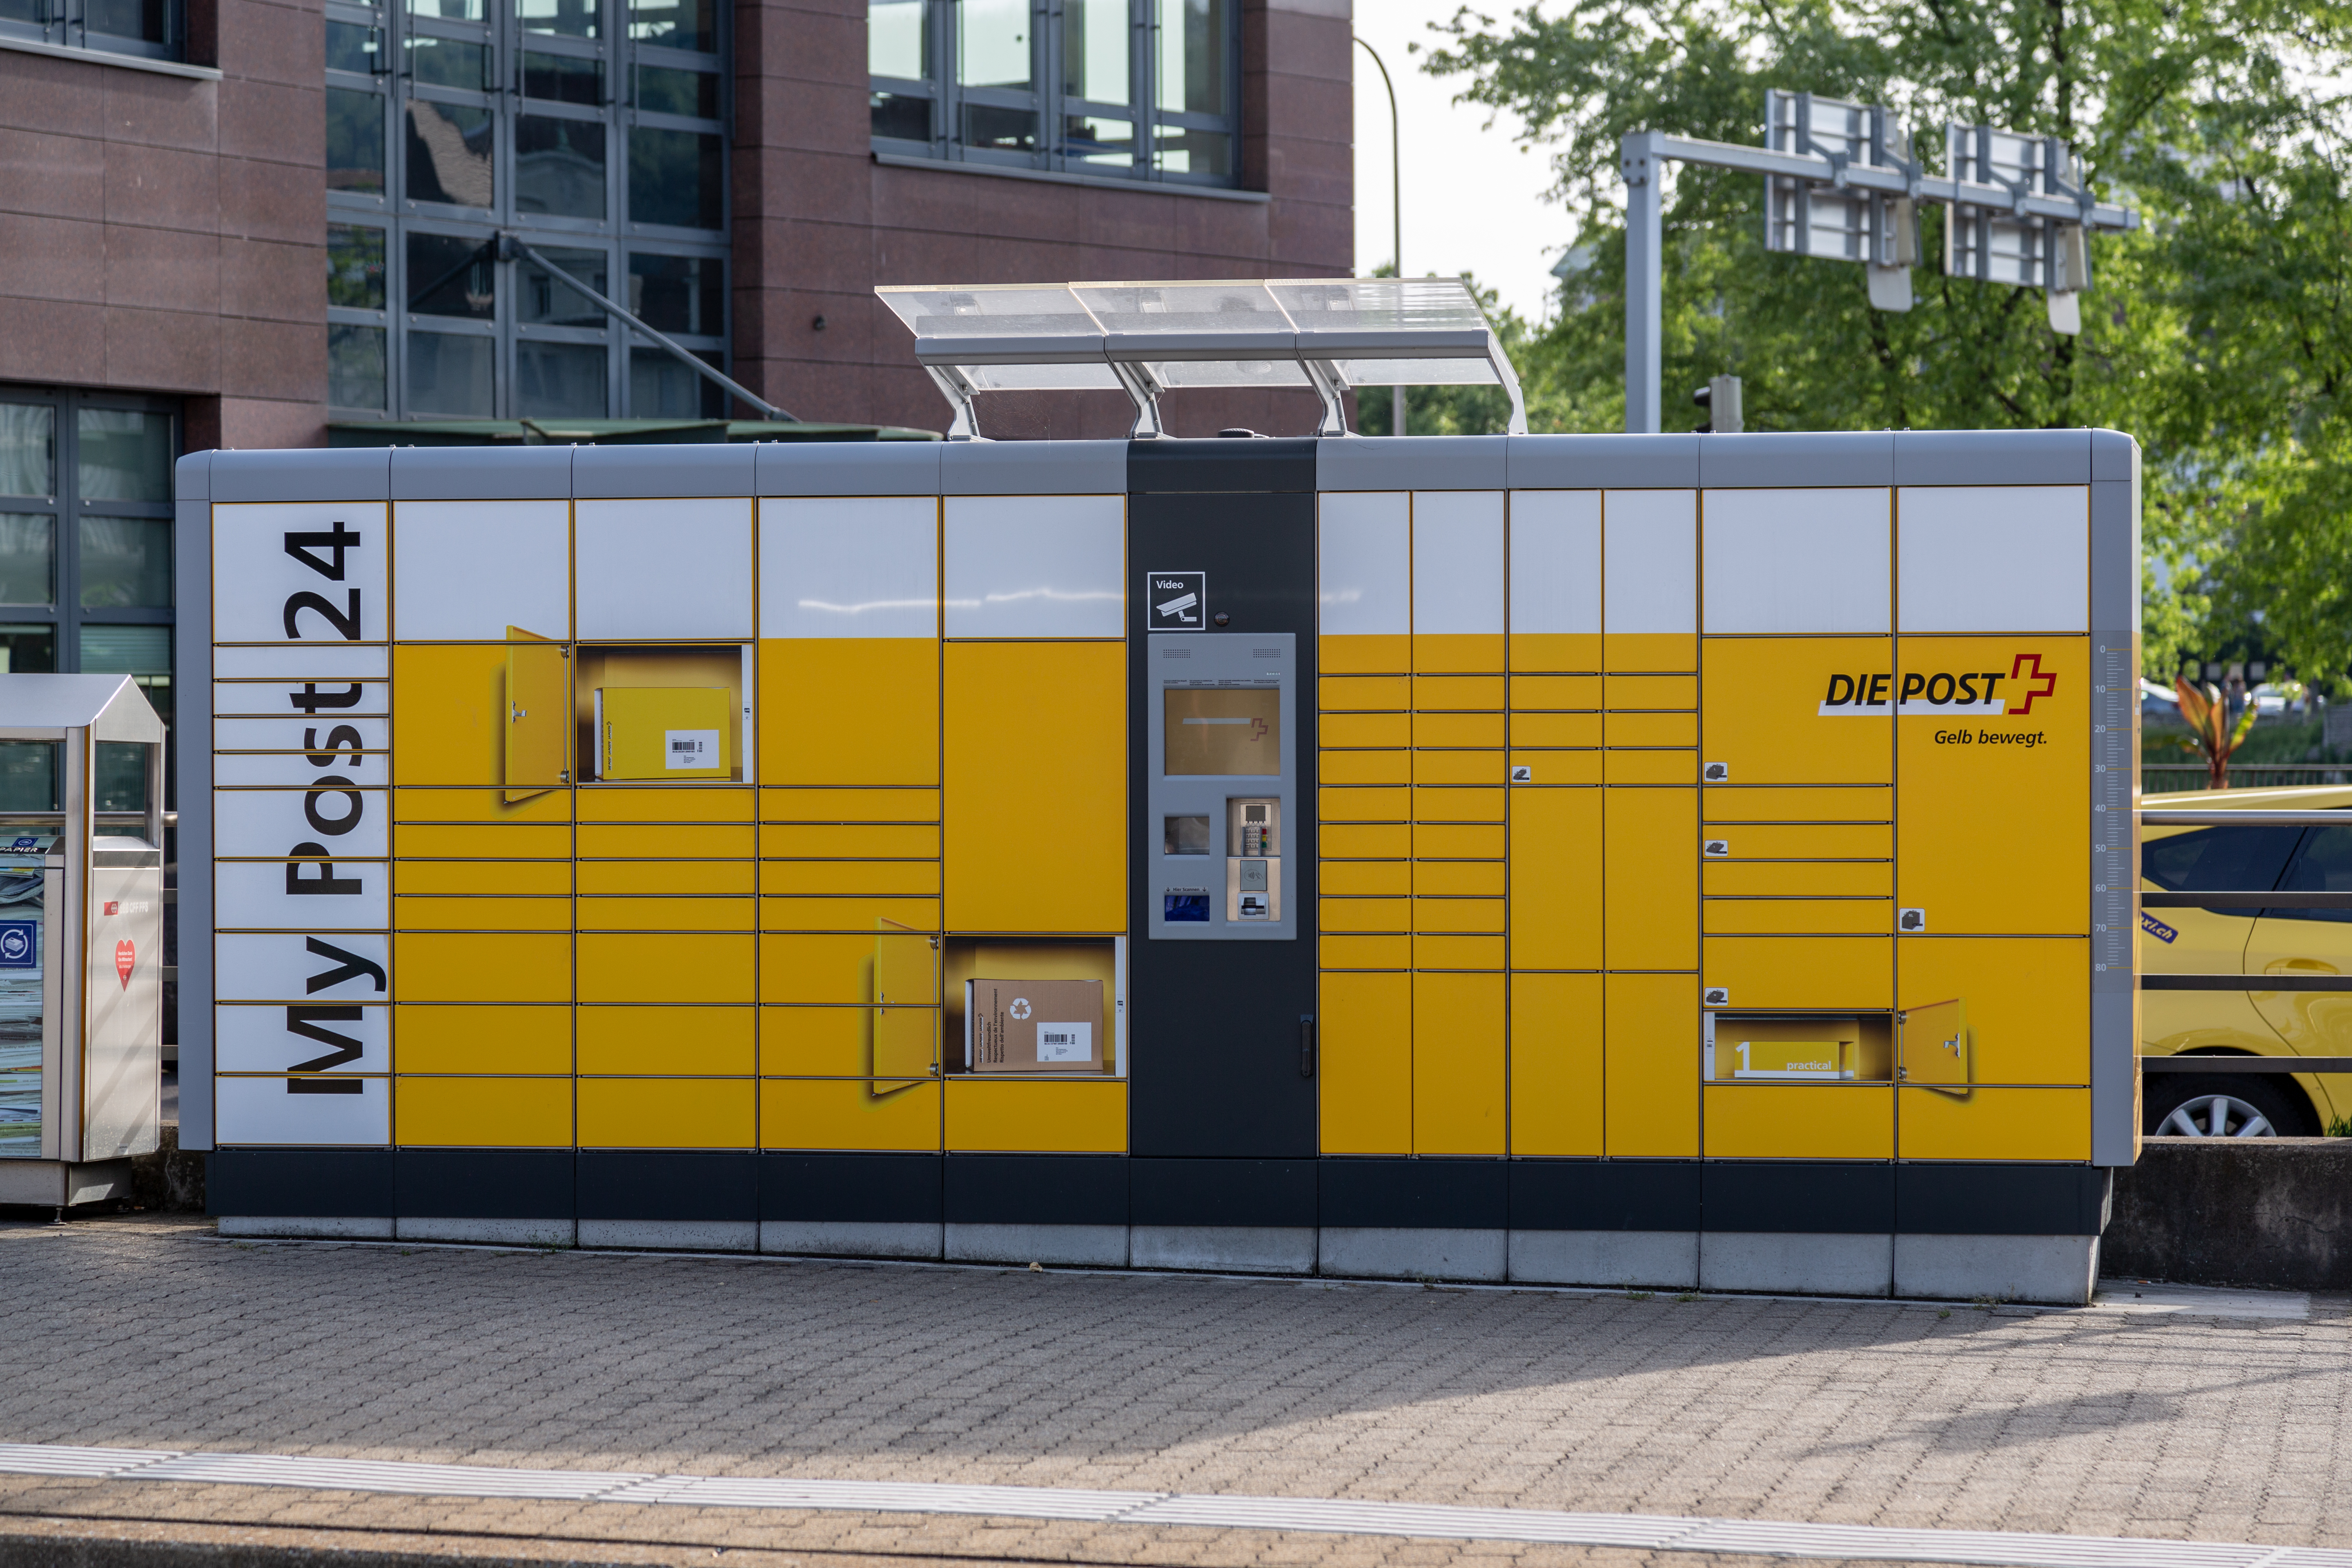 Why did Amazon deliver to a parcel locker?